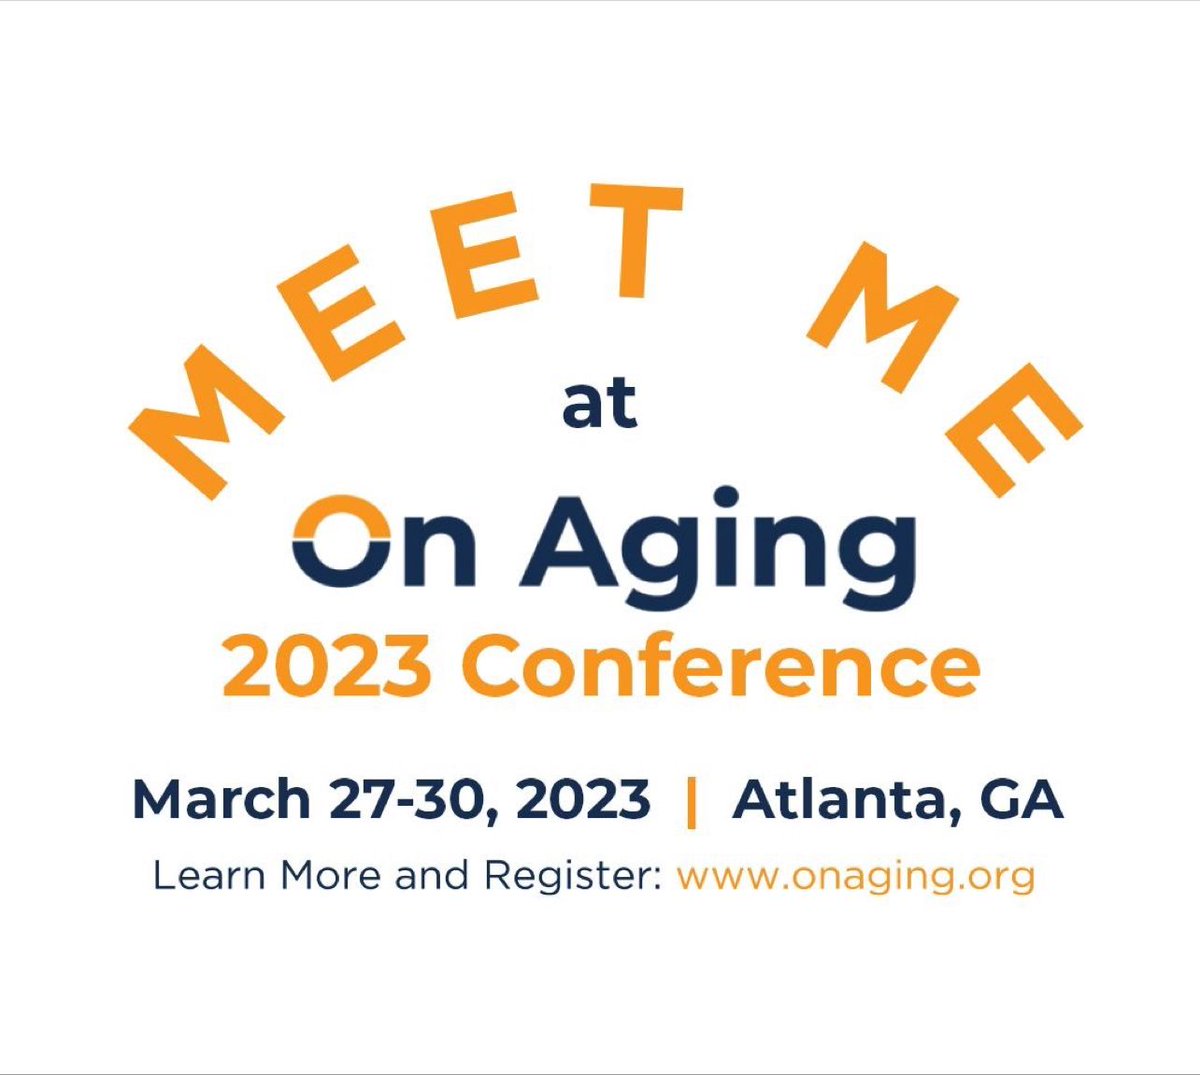 Hello from @ASAging's #OnAging2023 in ATL! It's an honor to serve on this year's Host Committee, and I look forward to networking with so many incredible people & orgs this week. As our partners at Athens Community Council on Aging say: 'Aging, everyone's doing it!' #endageism